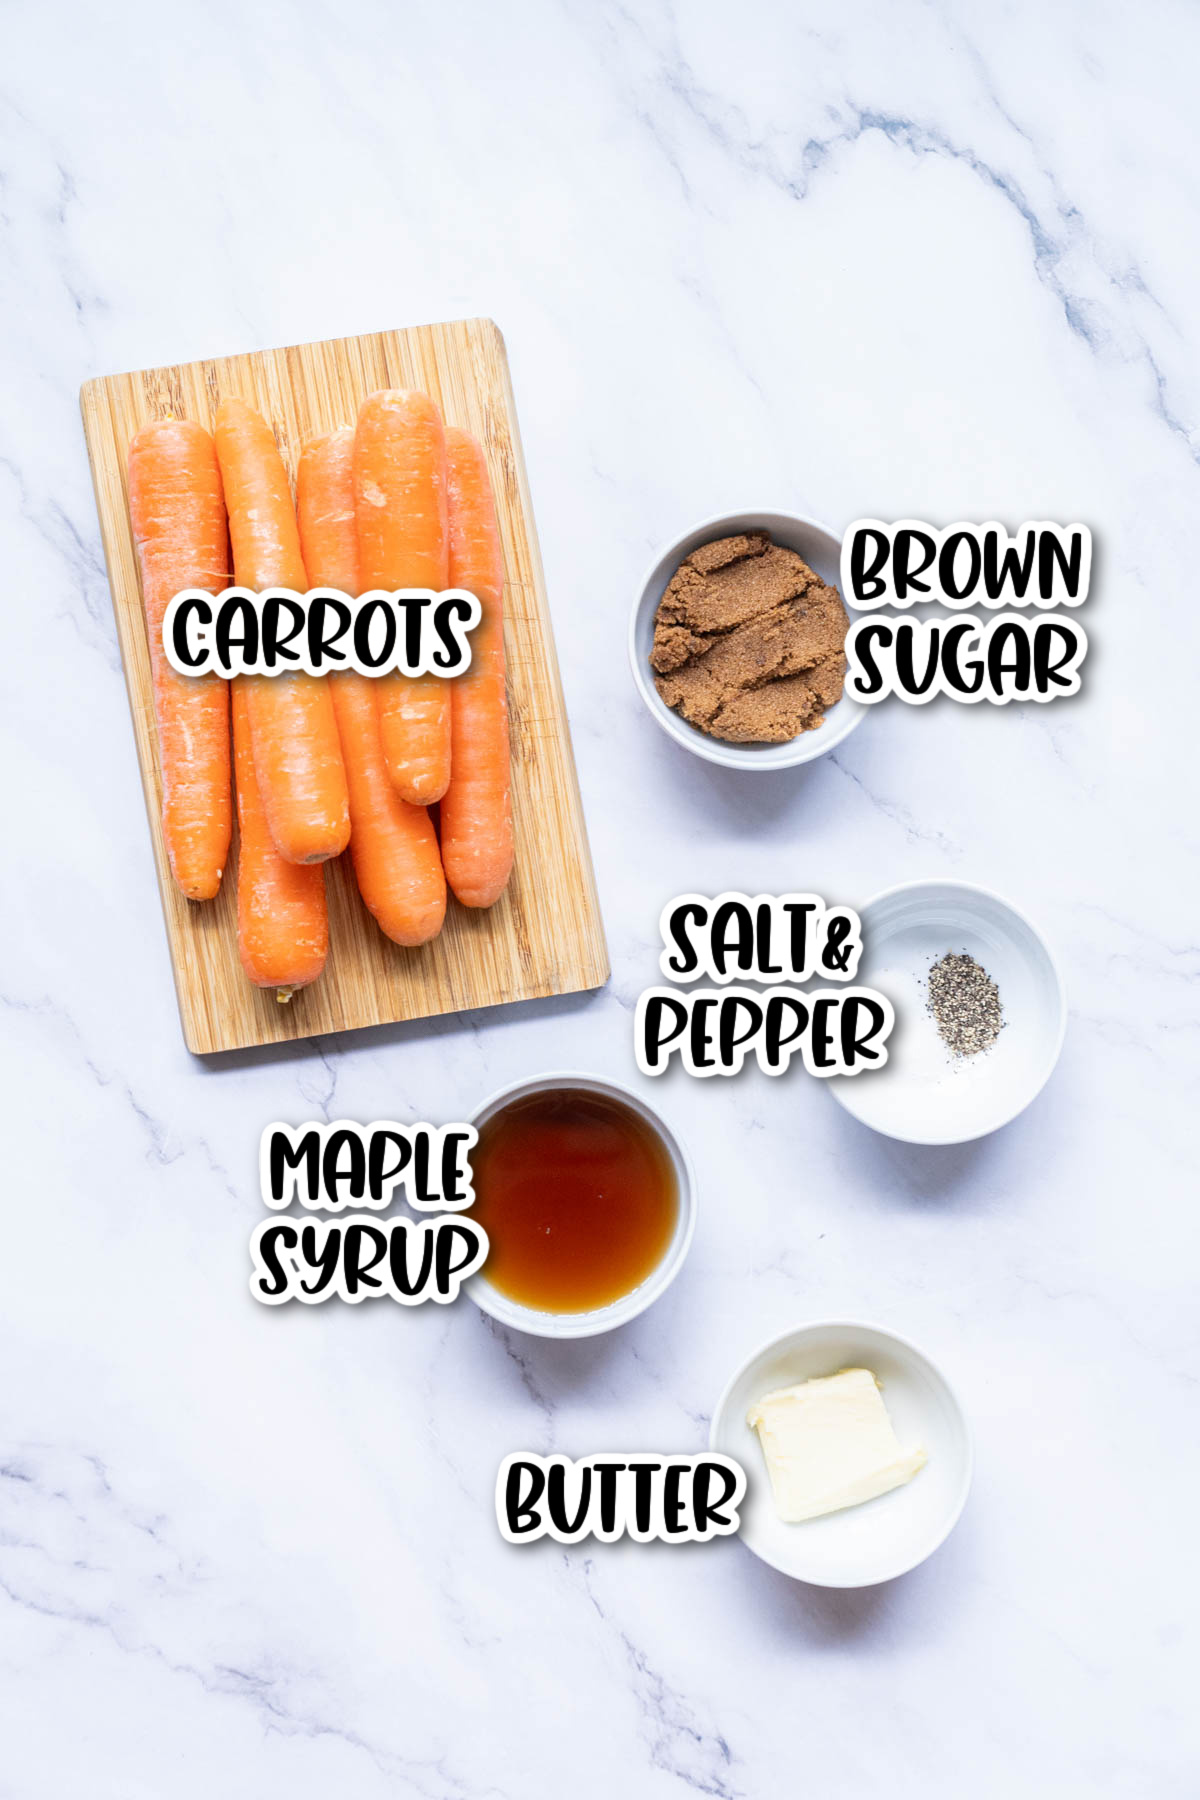 The ingredients for maple glazed carrots are shown on a marble cutting board.